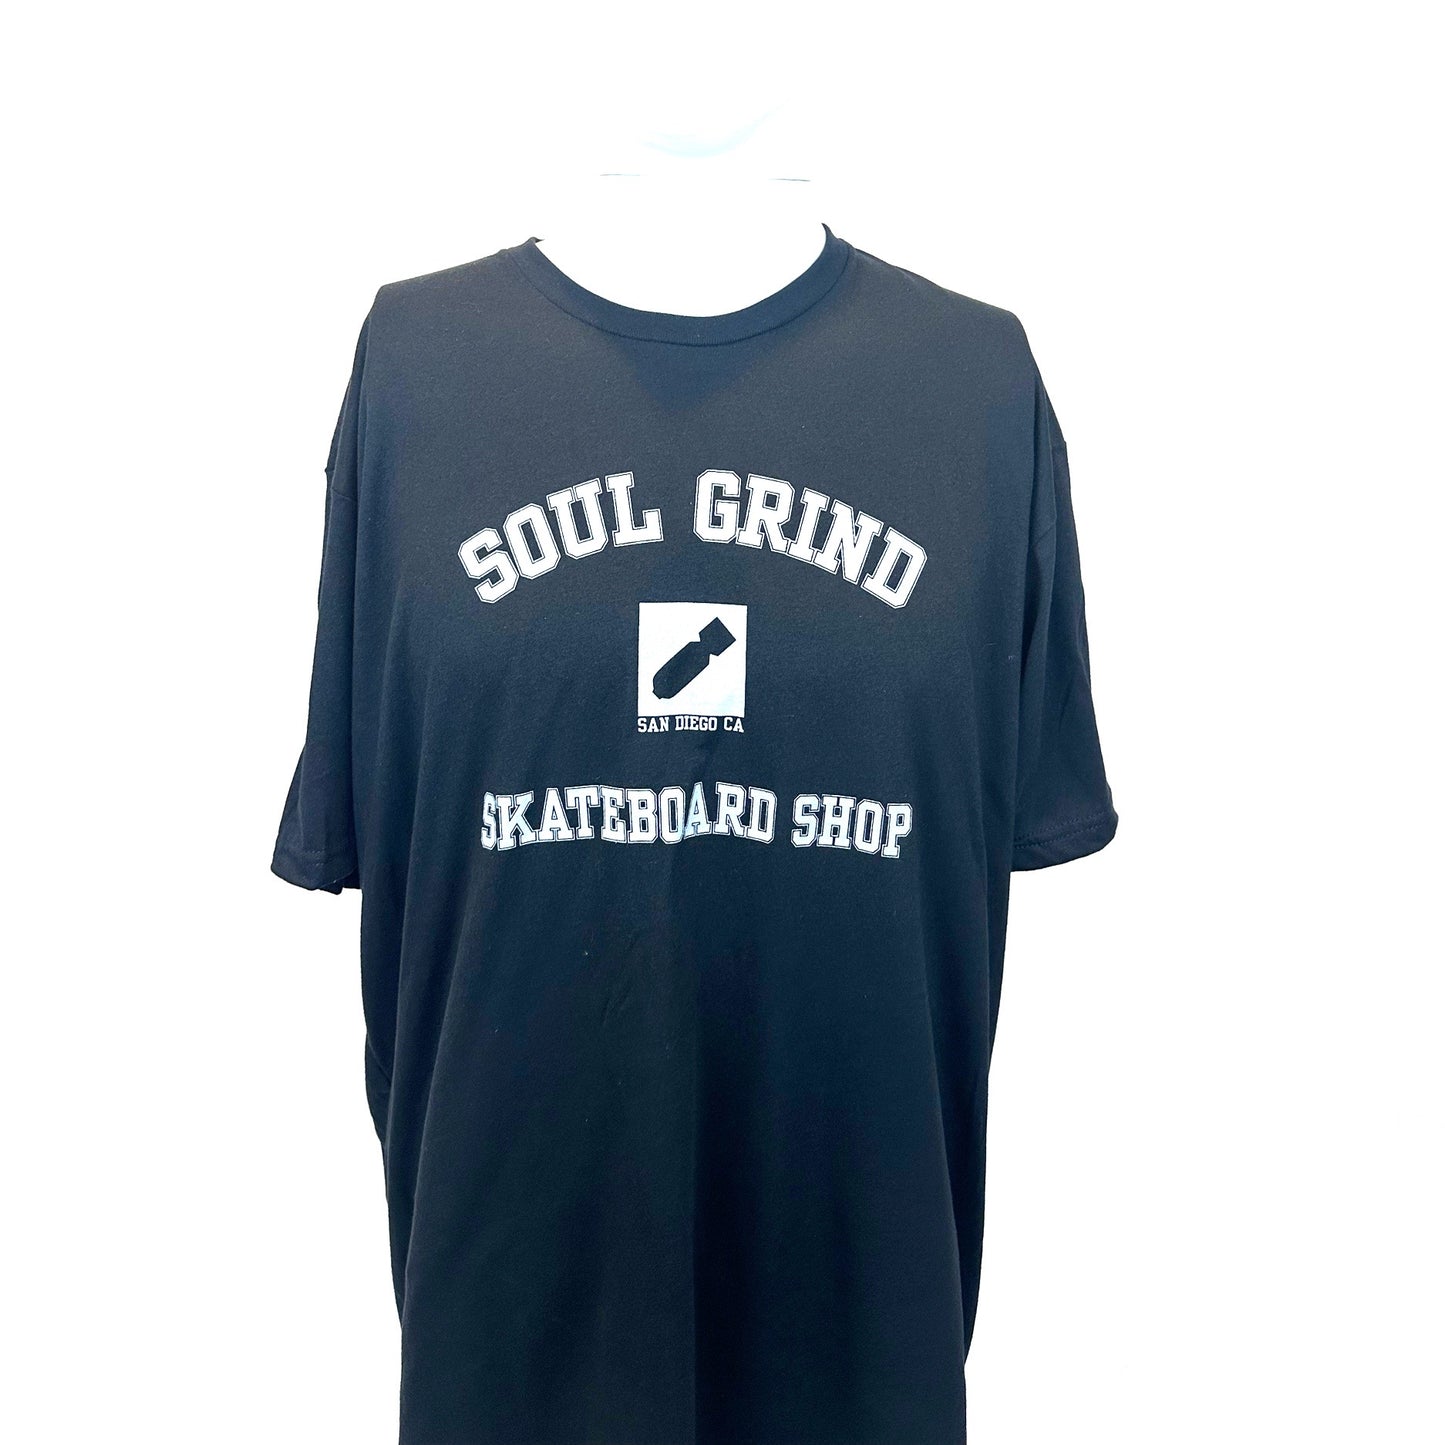 Soul Grind T-Shirt Small Black College